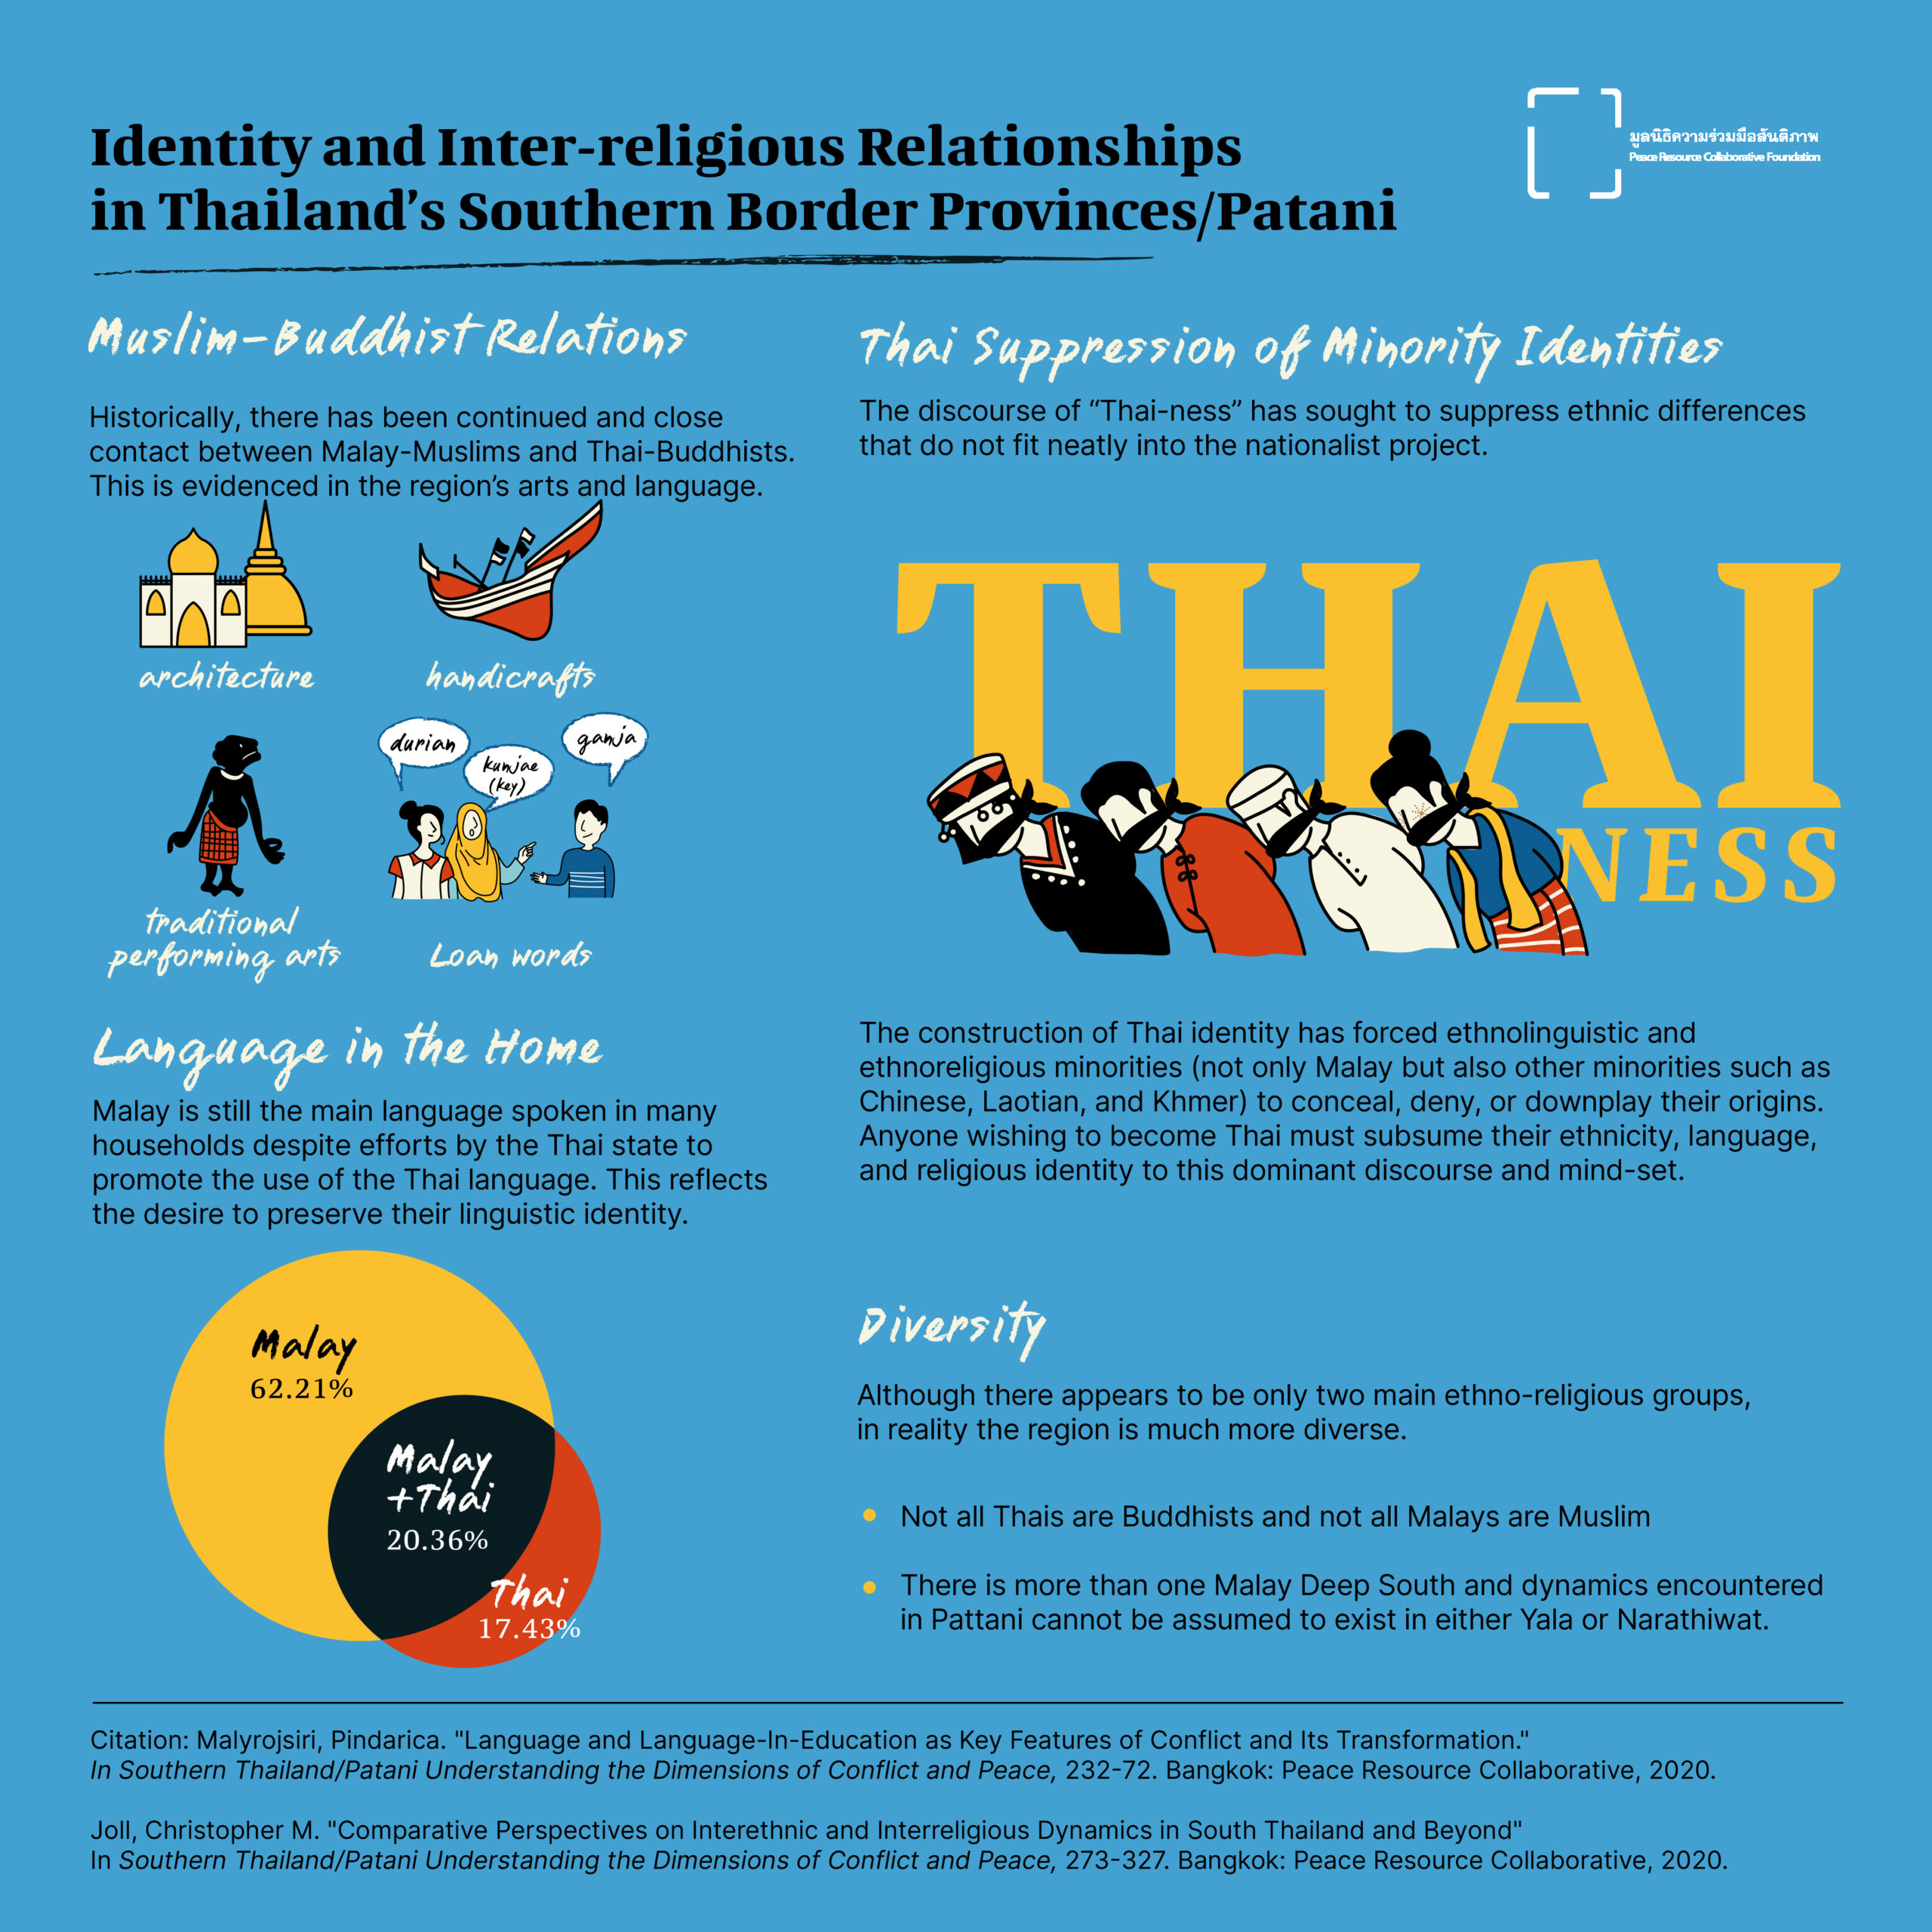 Identity and Inter-religious relationships in Thailand's Southern Border Provinces/Patani